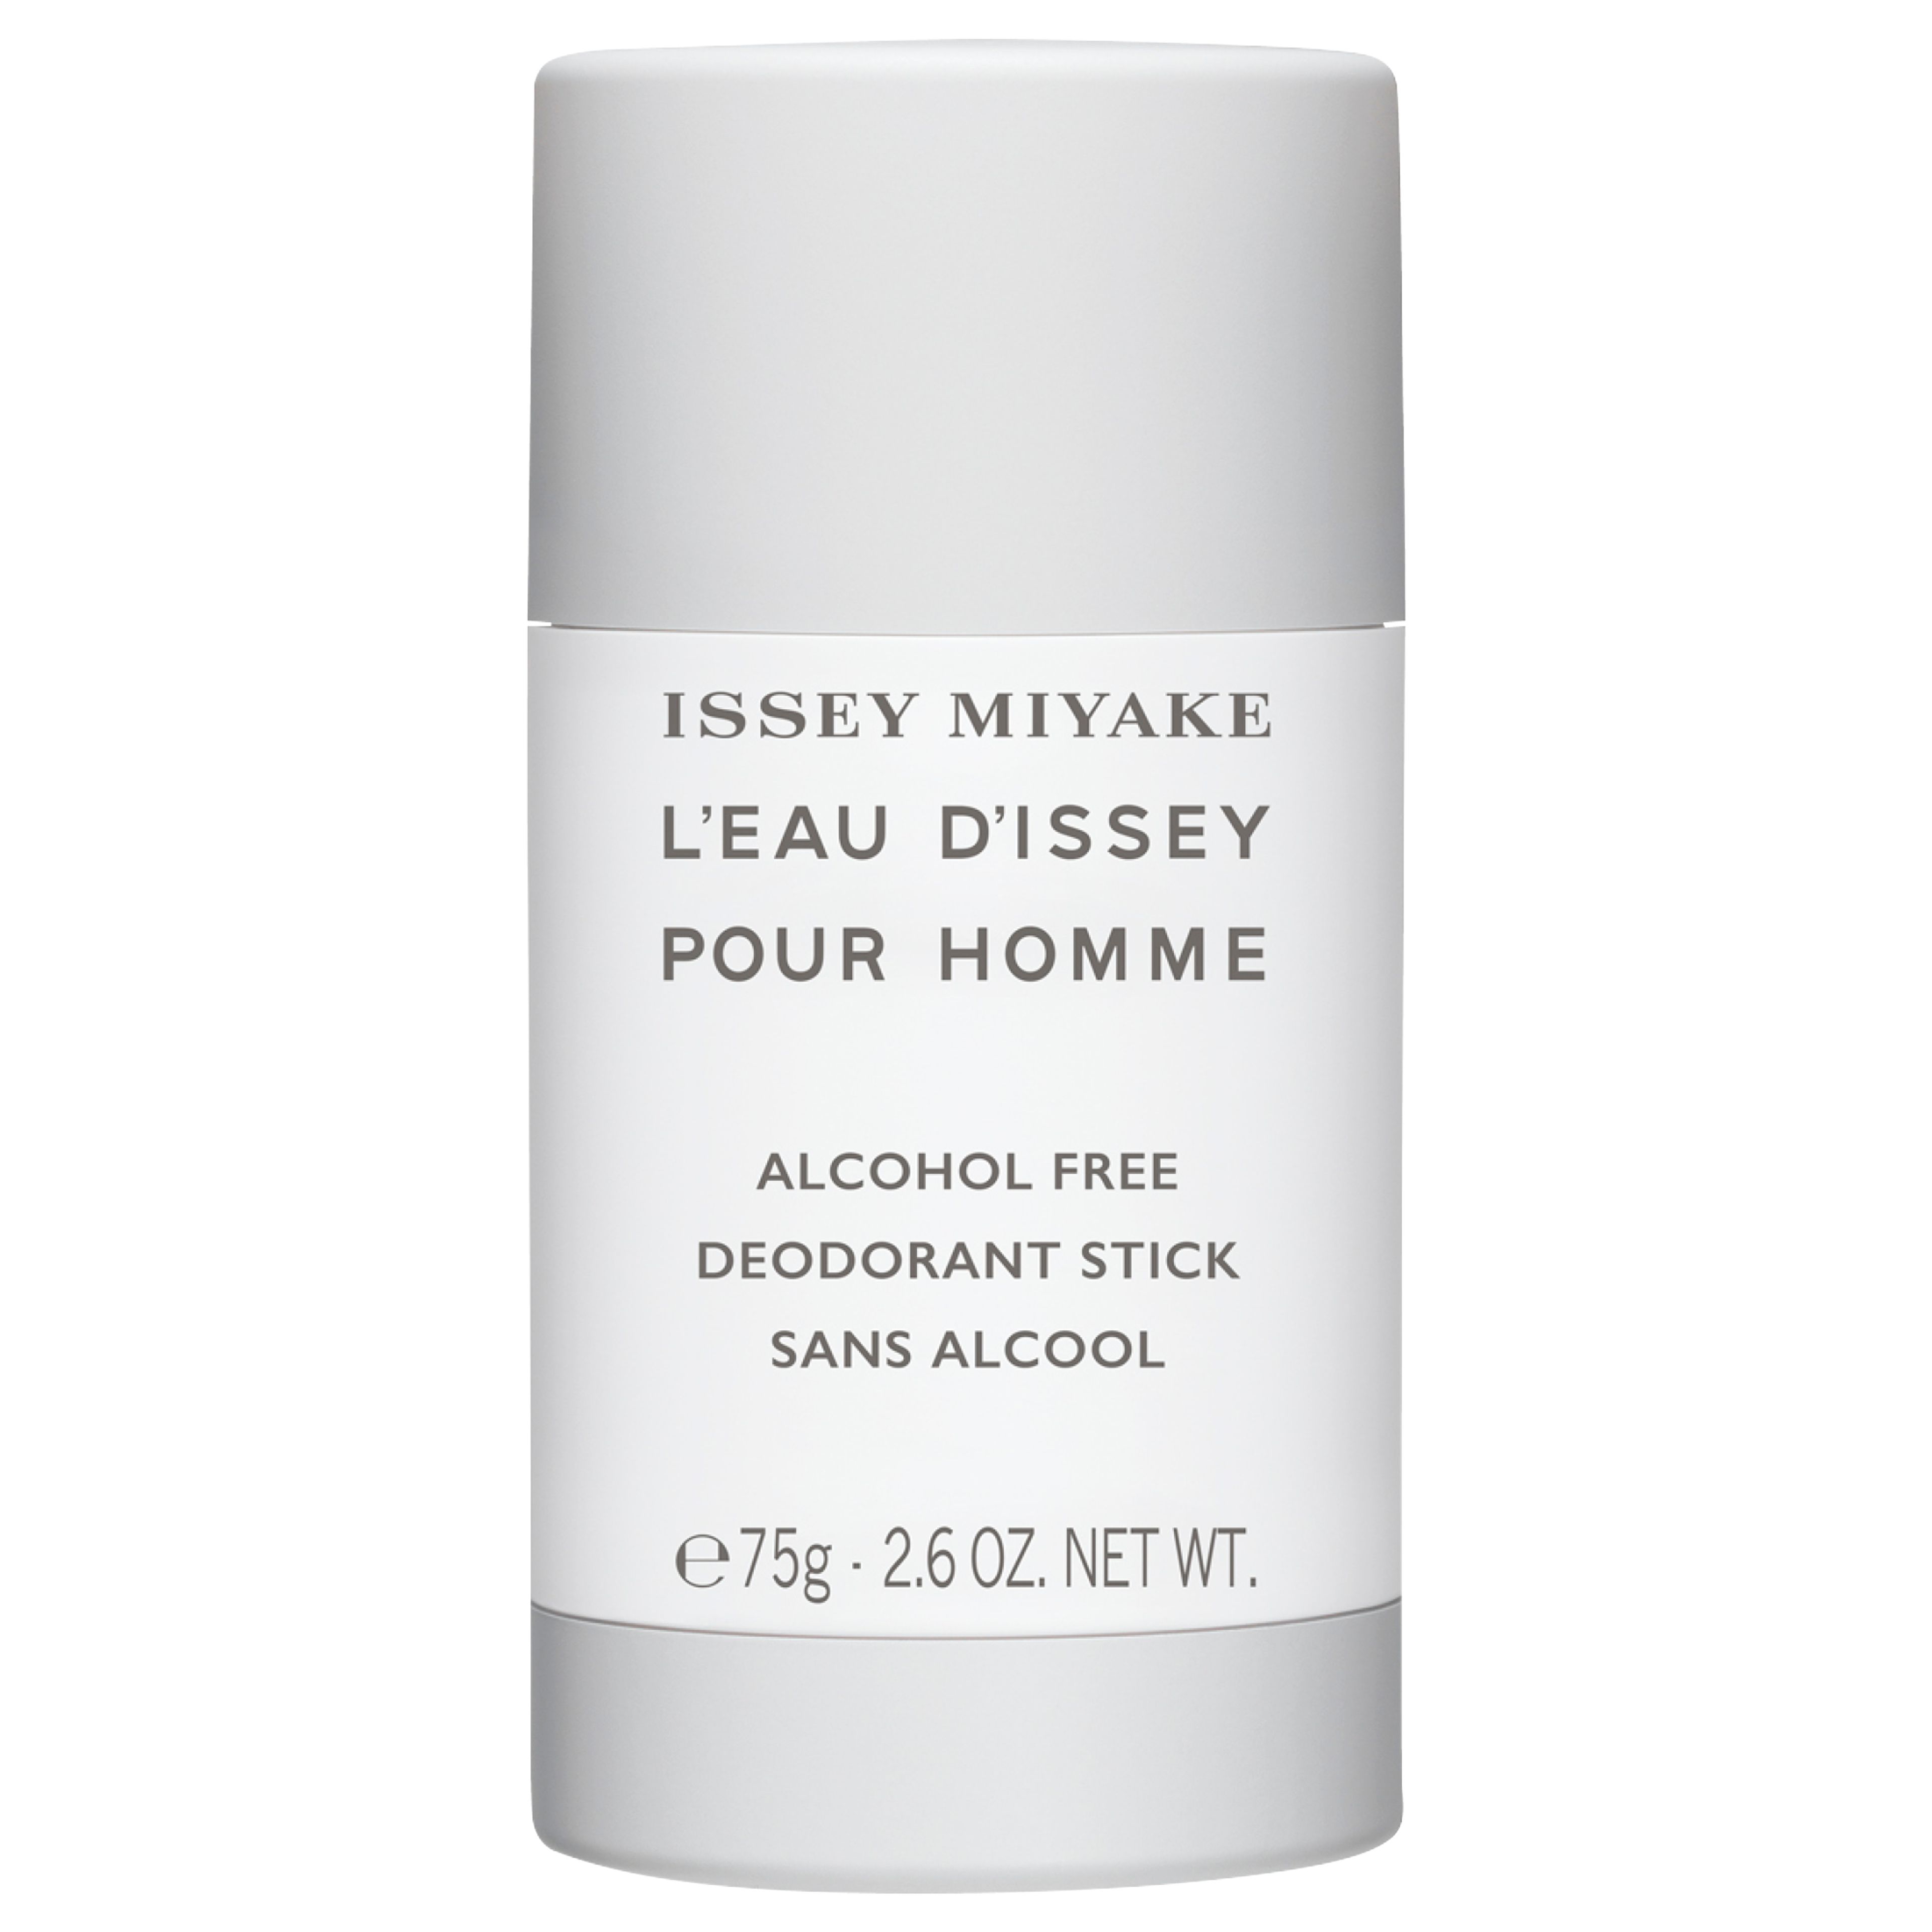 Issey Miyake L'eau D'issey Pour Homme Deodorant Stick 1